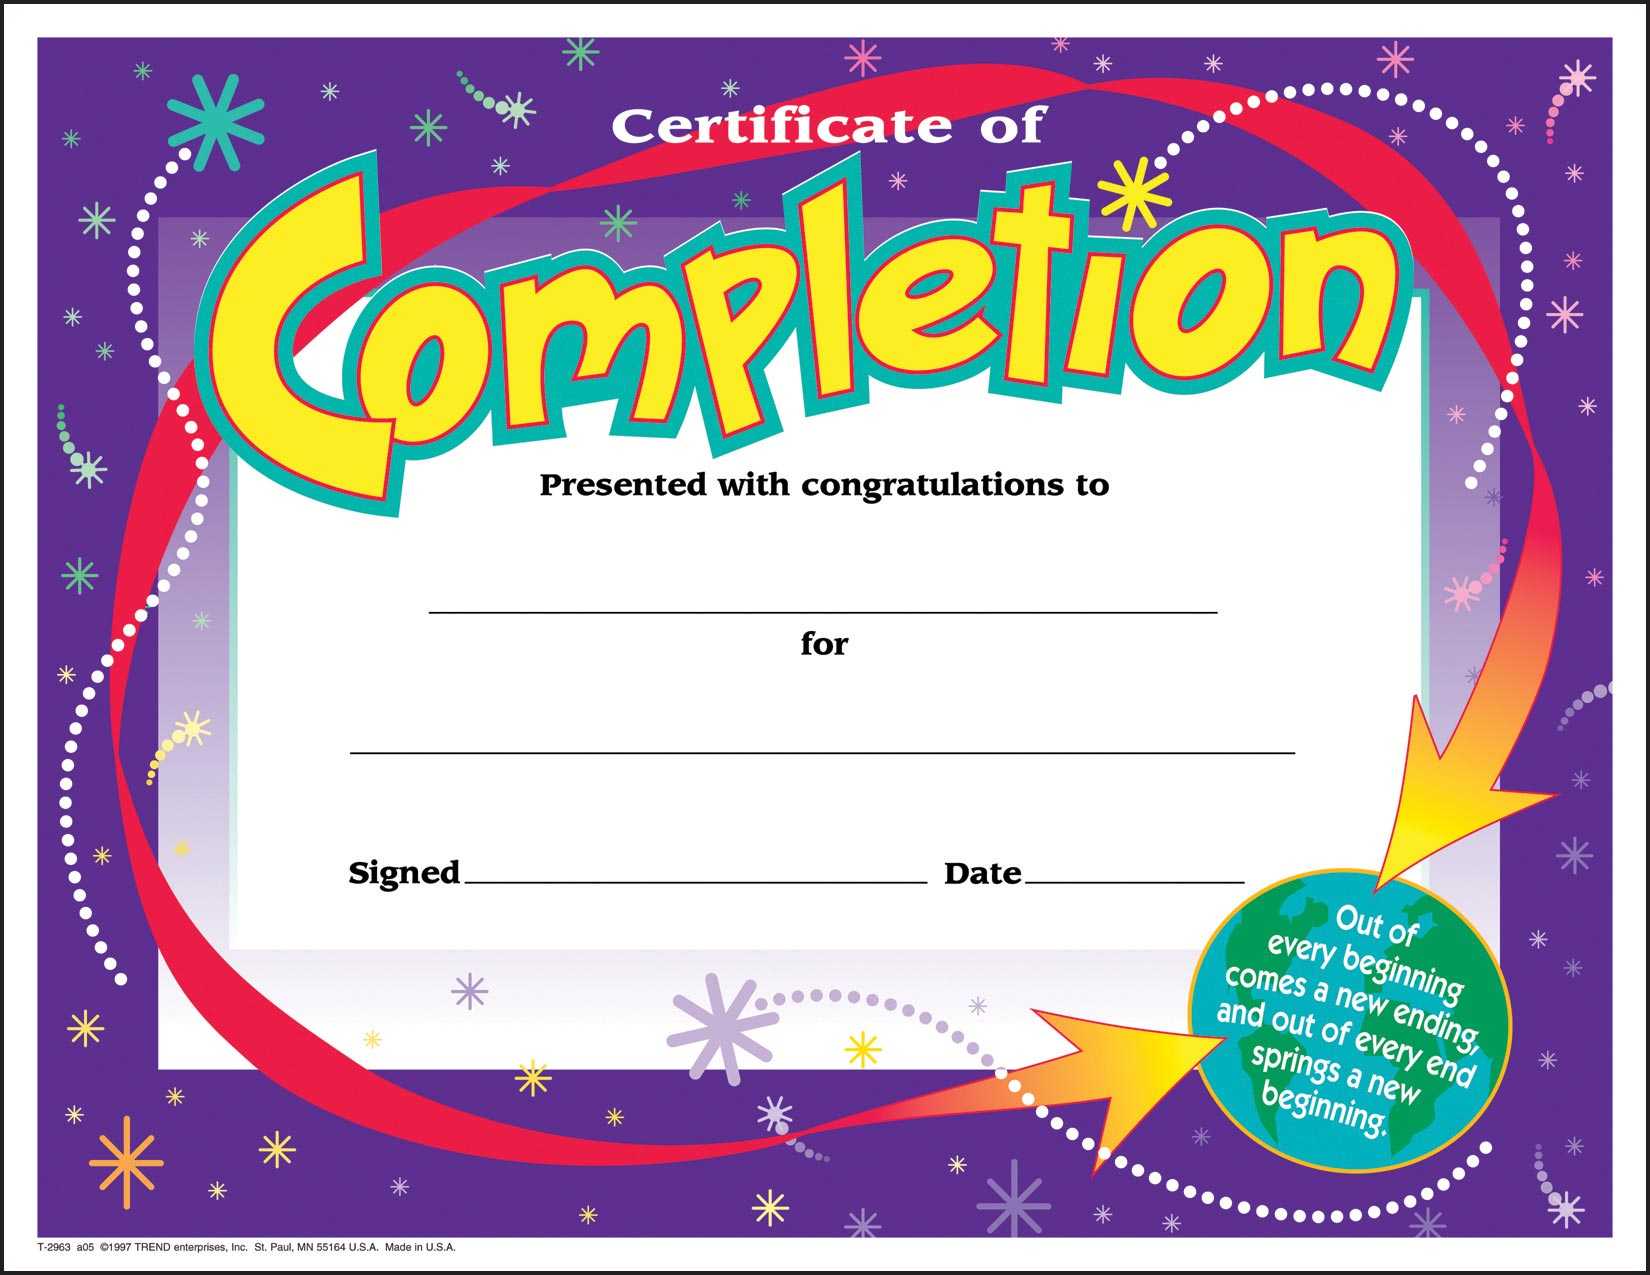 30 Kids Certificate Of Completion Awards Pack Regarding Certificate Of Achievement Template For Kids